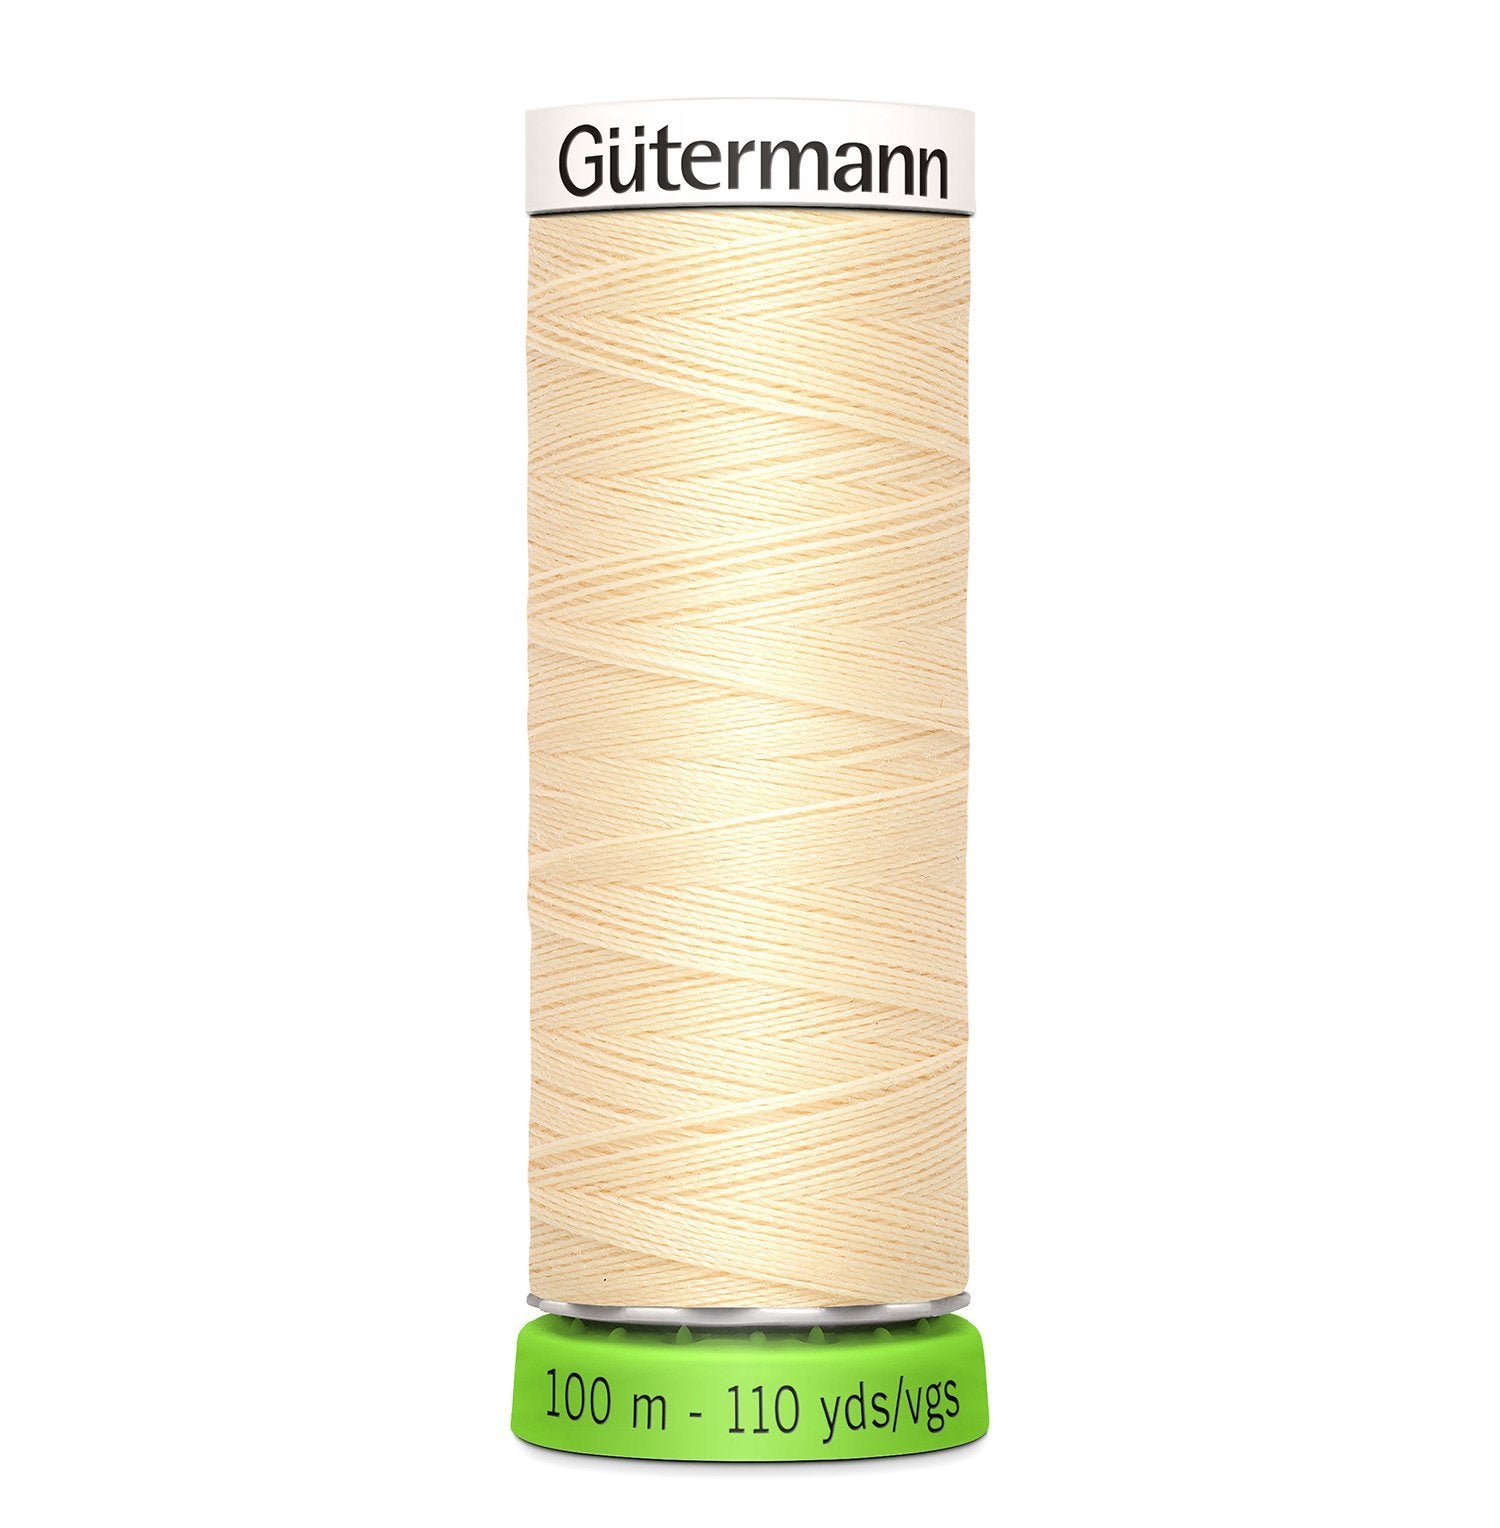 Gutermann Recycled Thread 100m, Colour 610 from Jaycotts Sewing Supplies